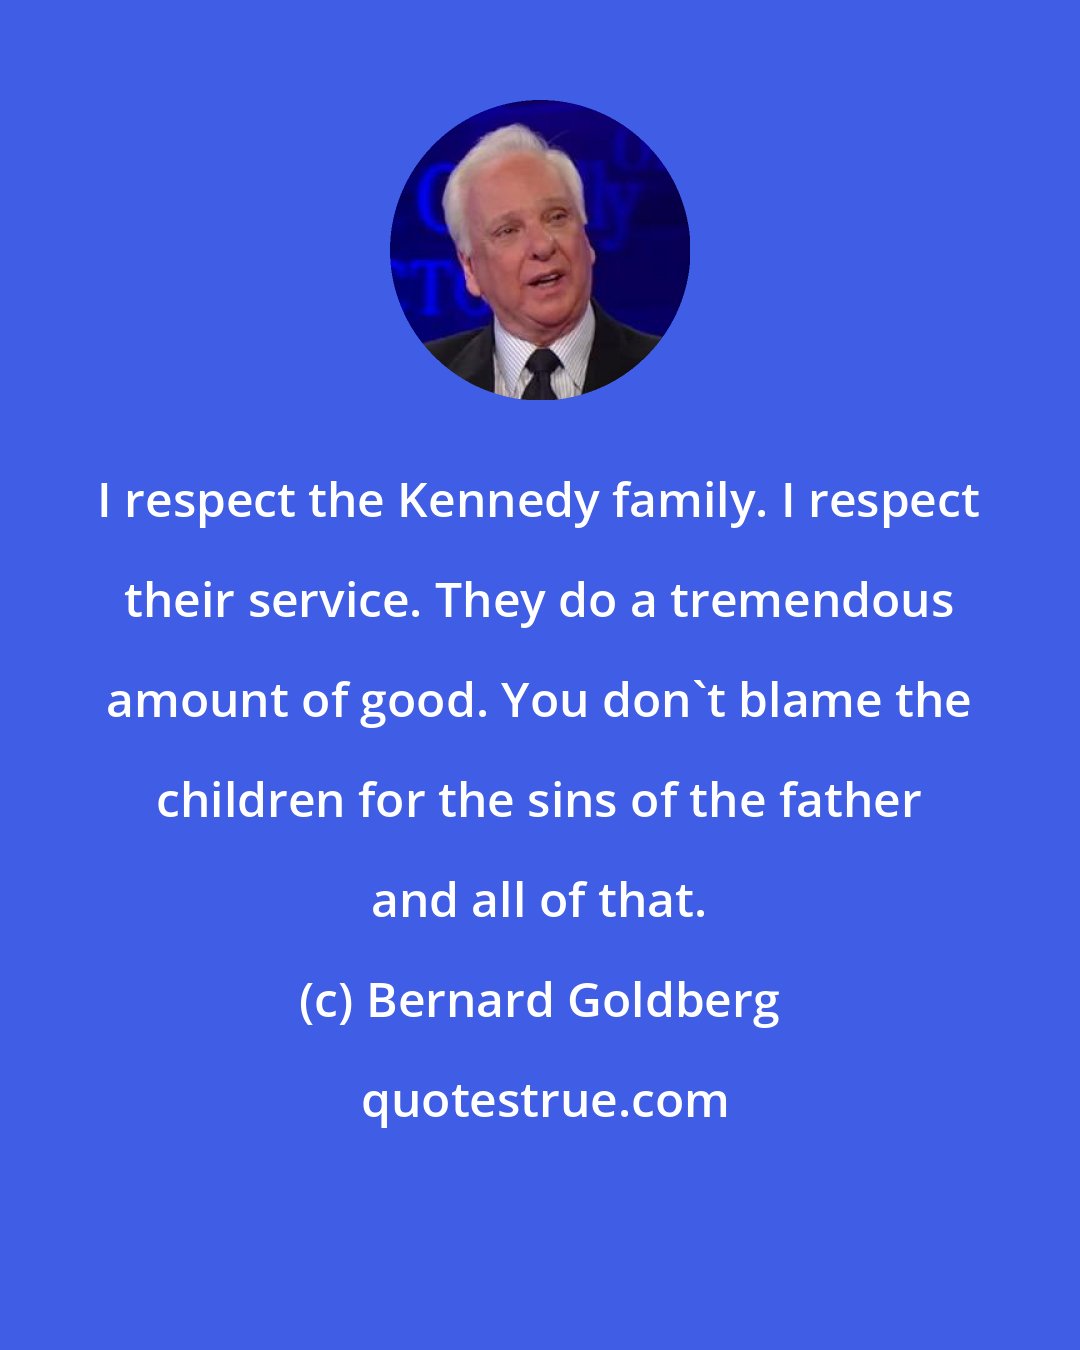 Bernard Goldberg: I respect the Kennedy family. I respect their service. They do a tremendous amount of good. You don't blame the children for the sins of the father and all of that.